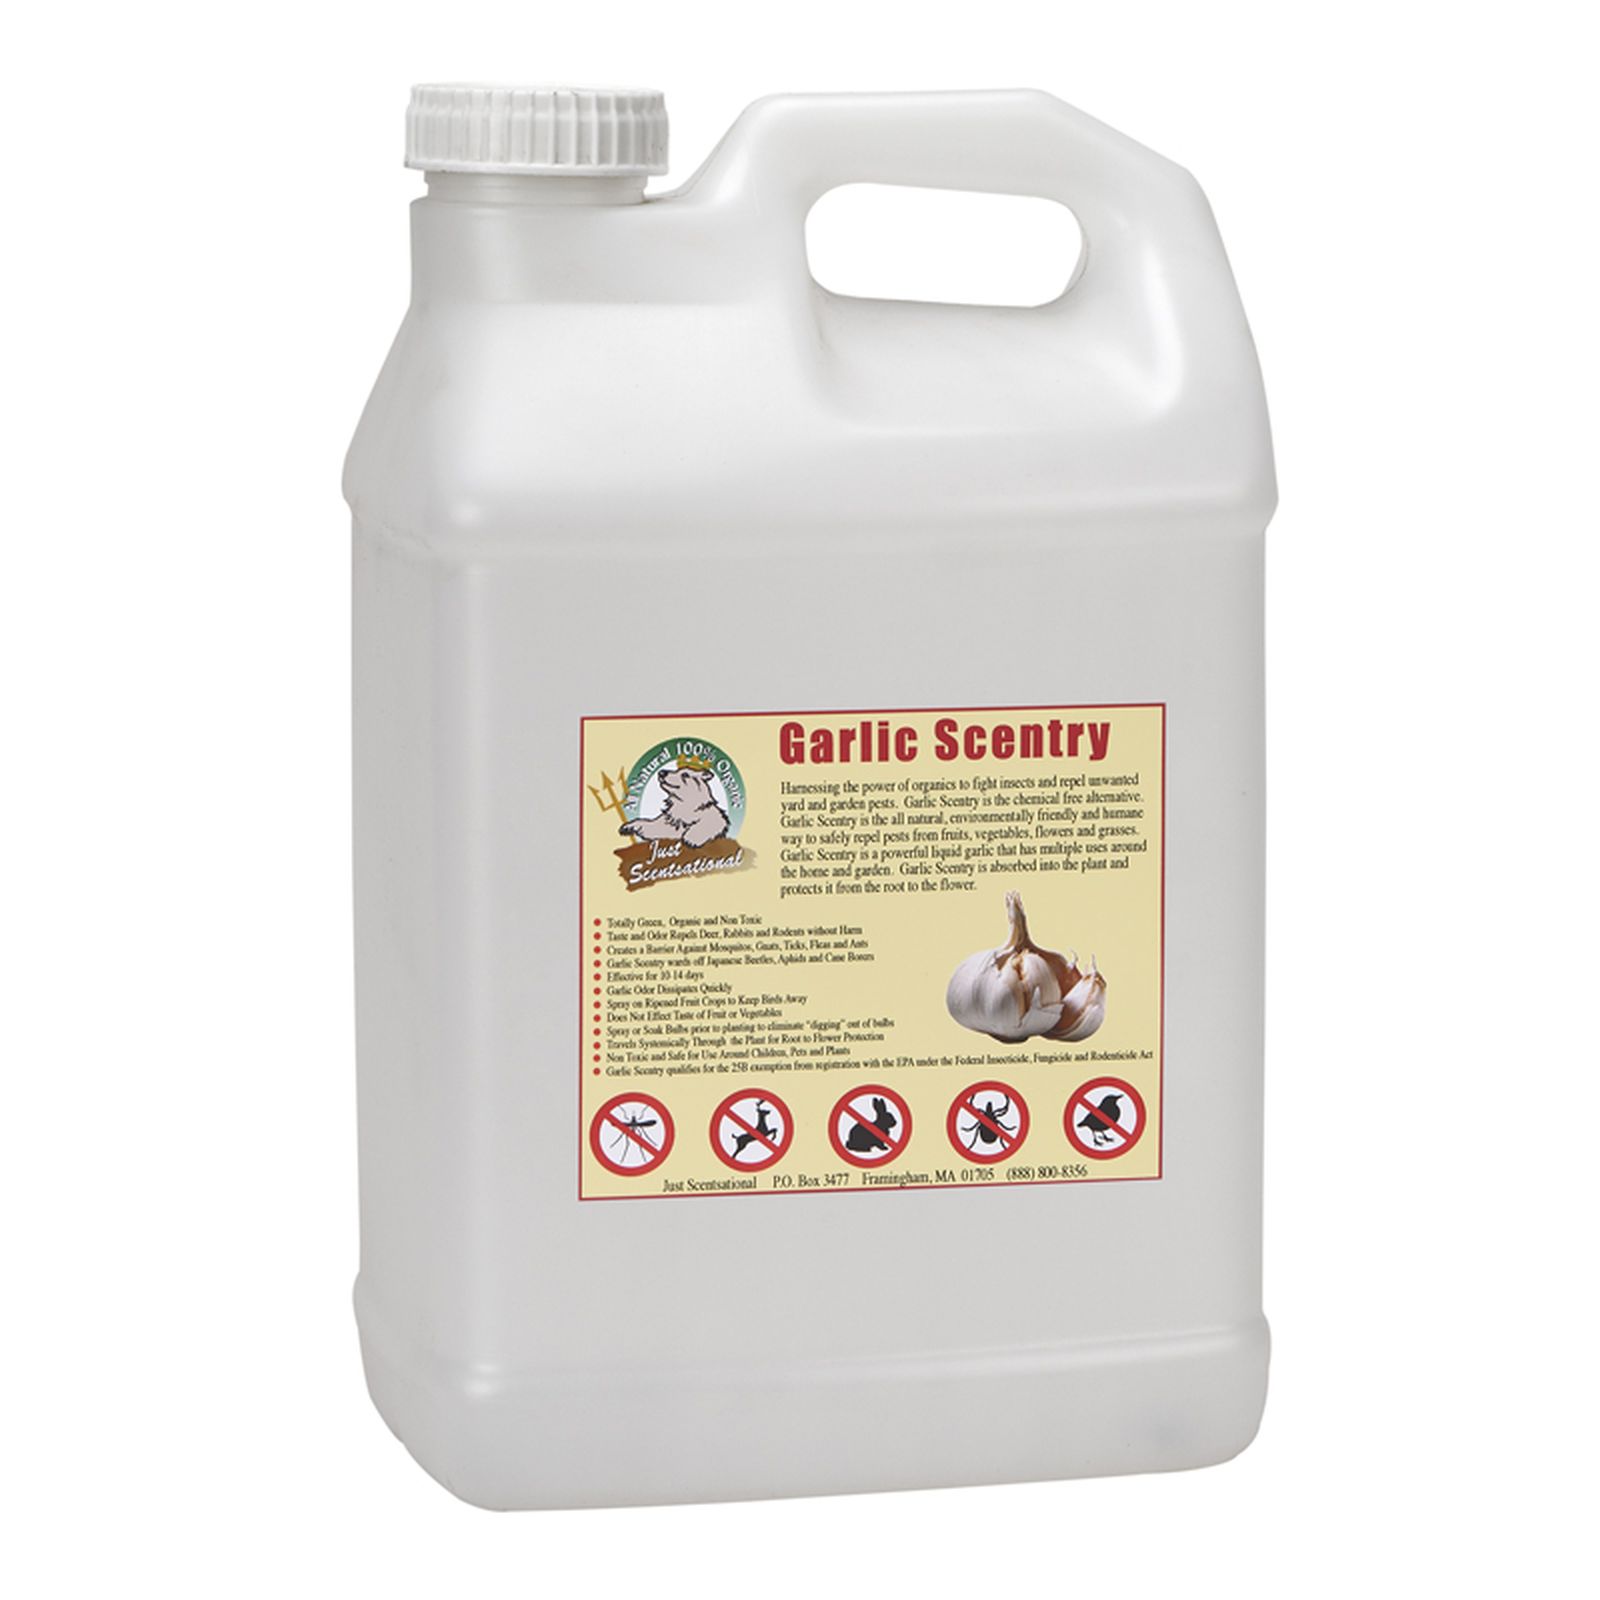 Just Scentsational 2.5 Gallon Garlic Scentry Concentrate Formula